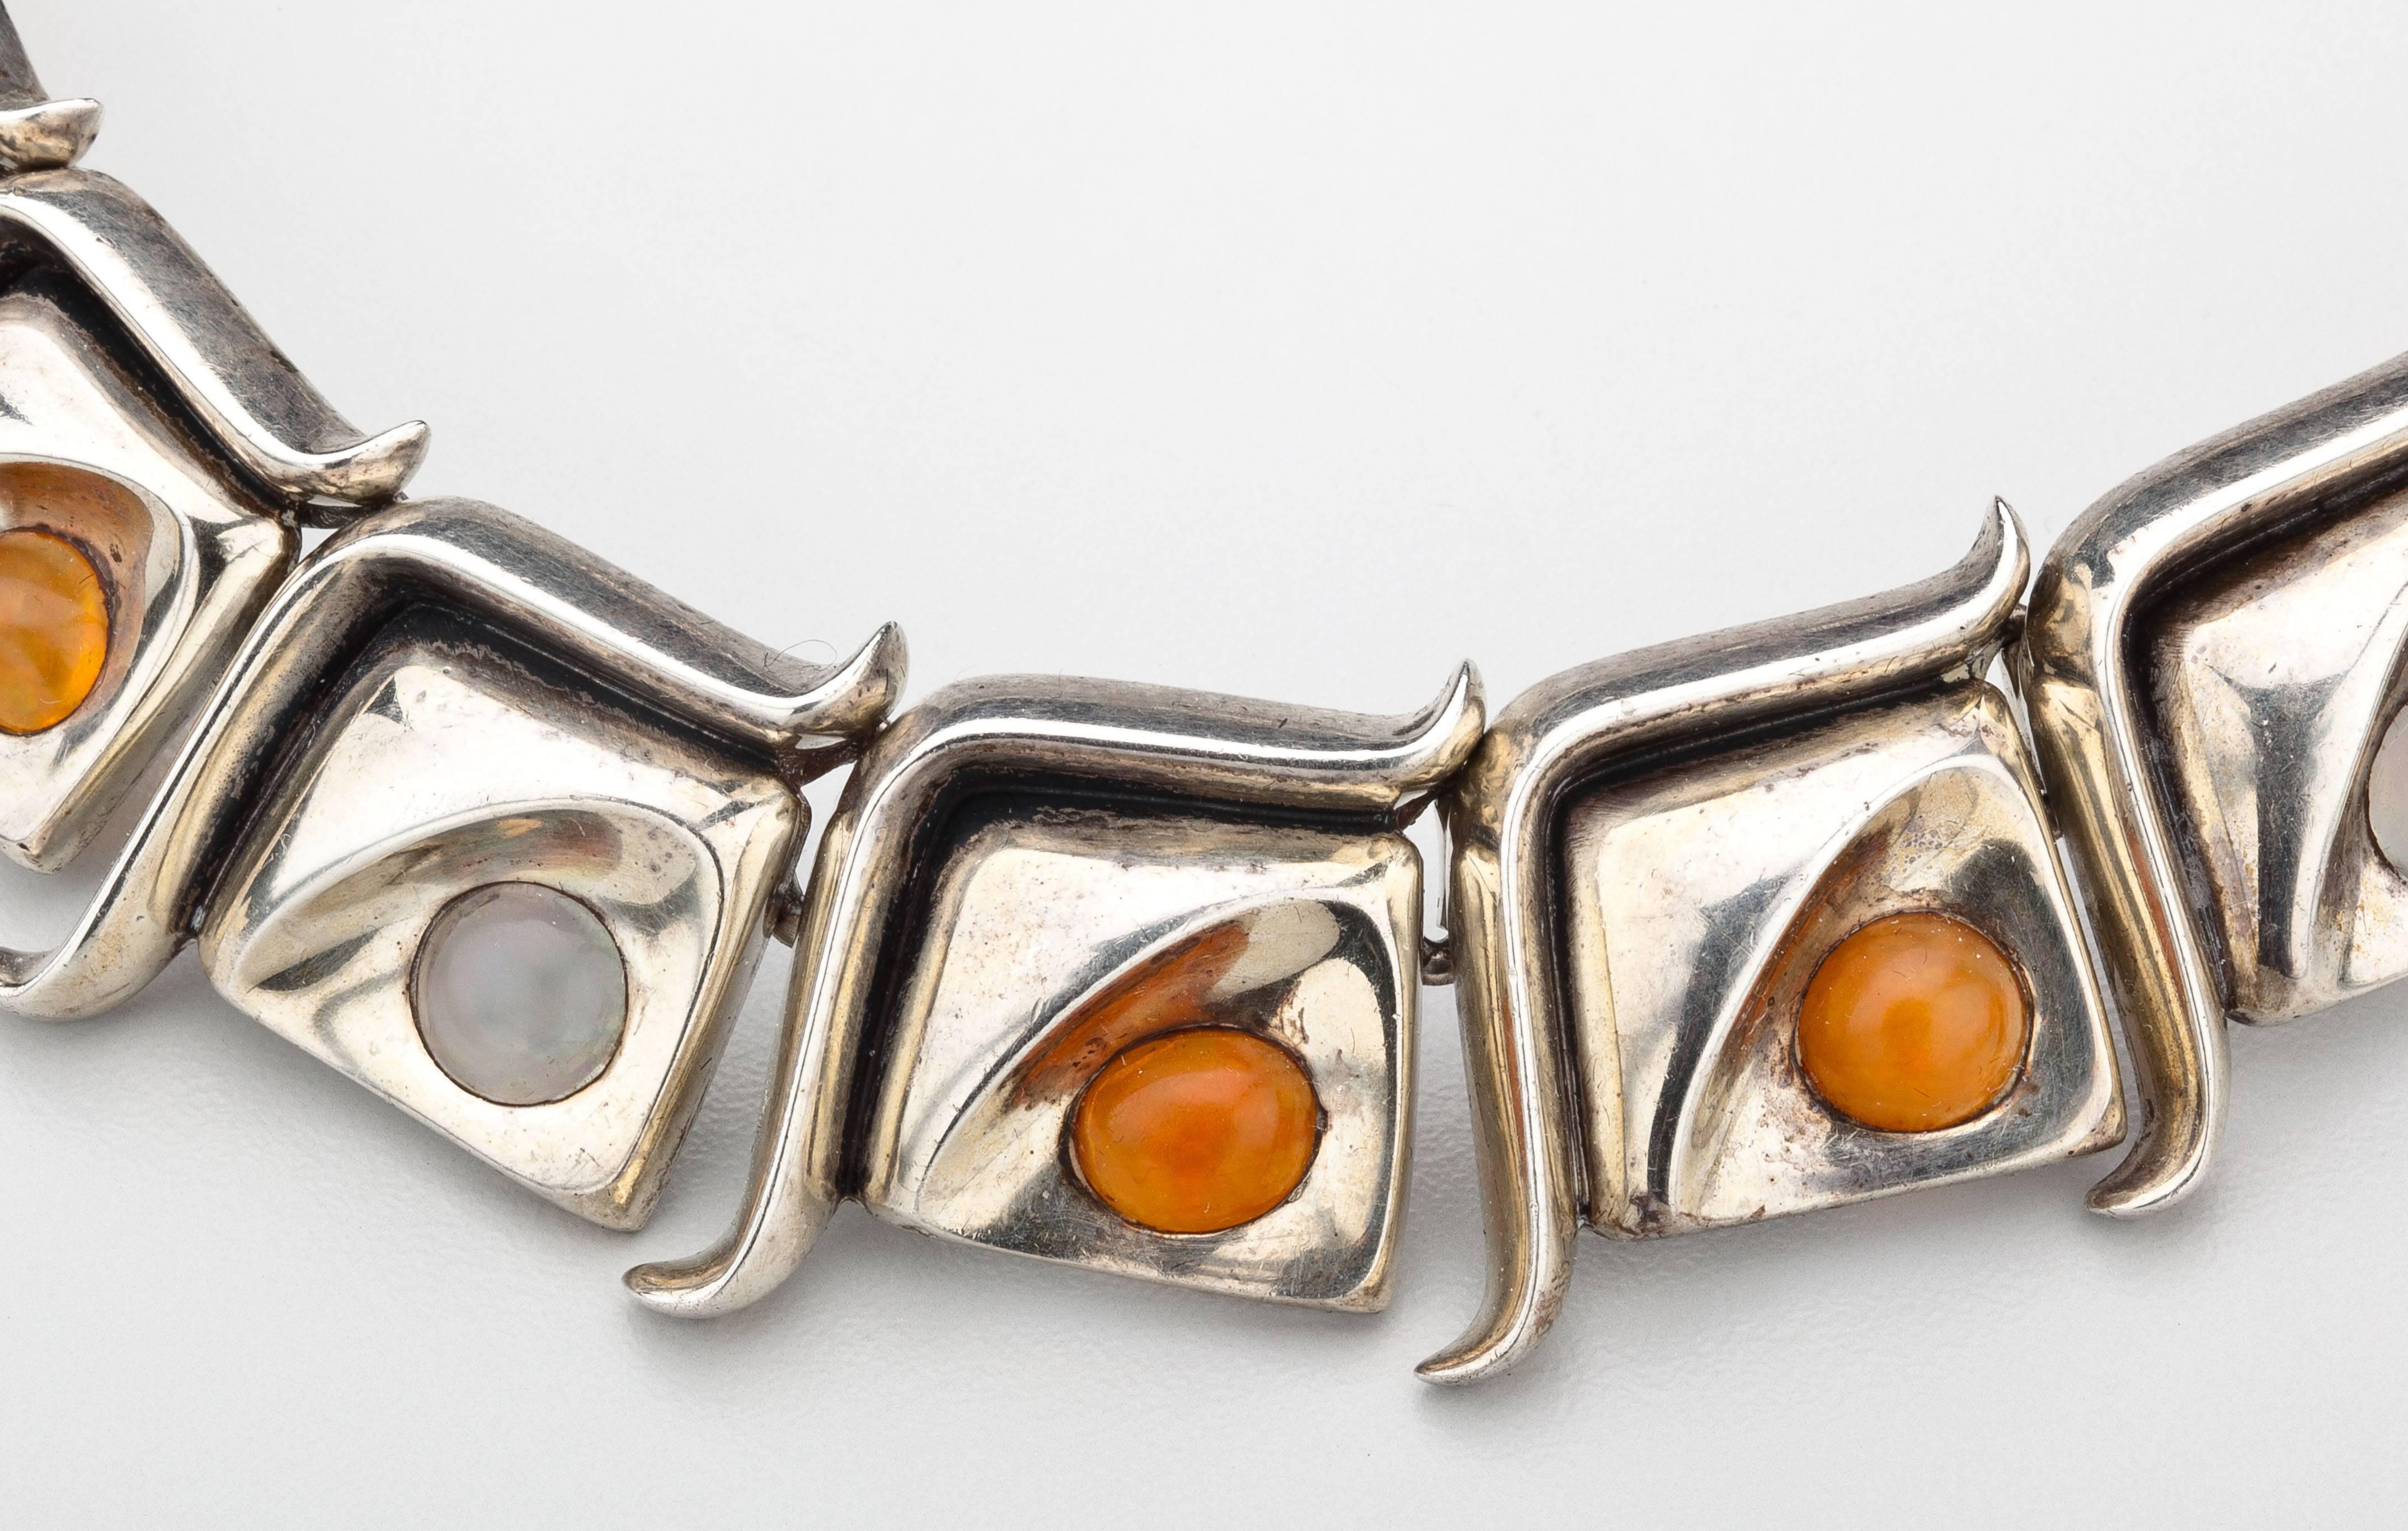 A necklace by Mexican master silversmith, Antonio Pineda, in sterling silver and  opal.  Antonio designed this necklace to feature ten asymmetrical panels each accented with either a fire or white cabochon opal.   Antonio did from time to time use a